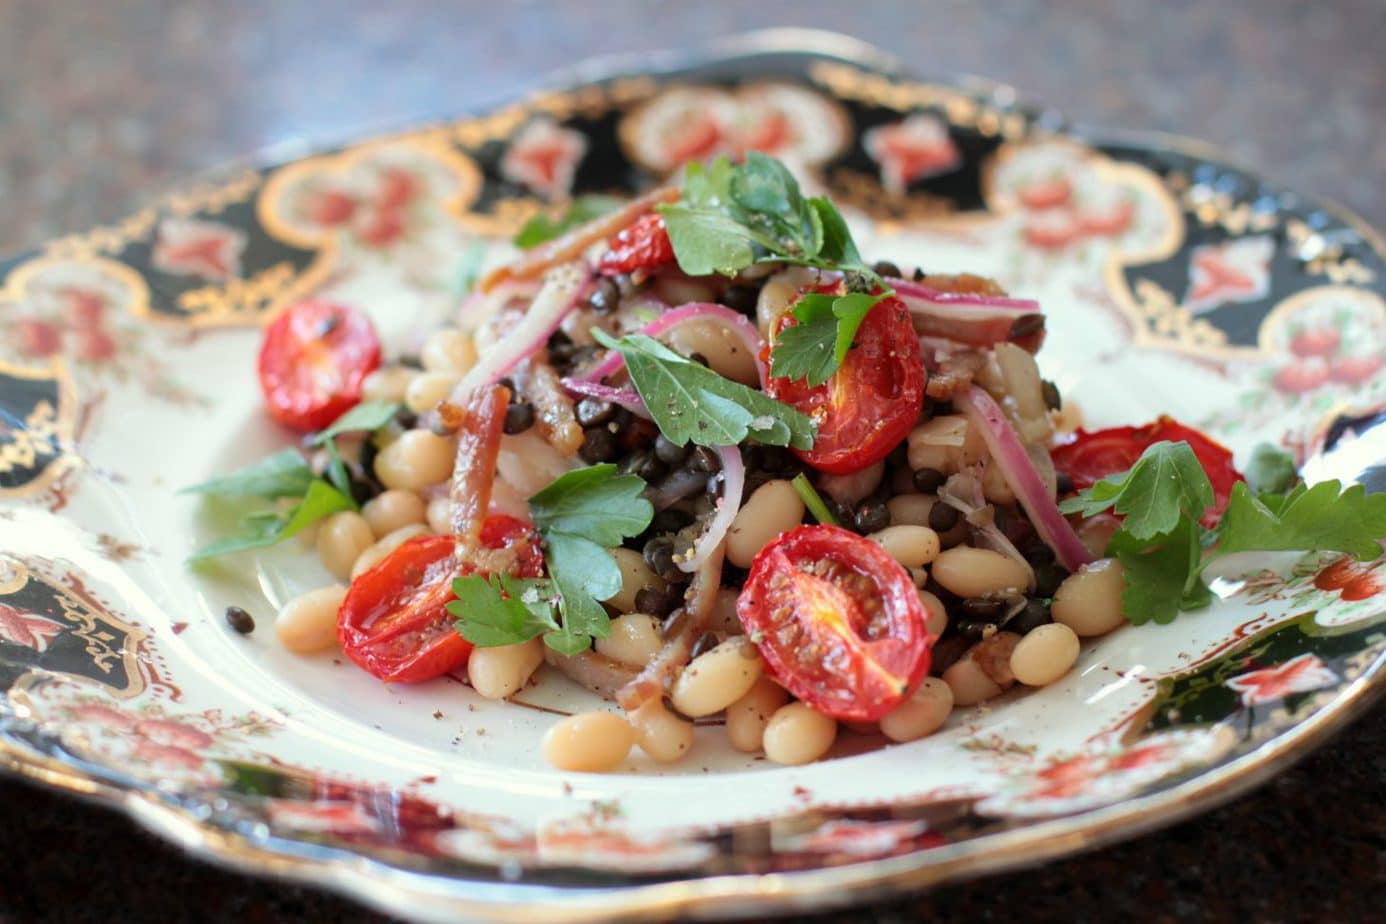 A vibrant white bean lentil and bacon salad on a vintage plate.